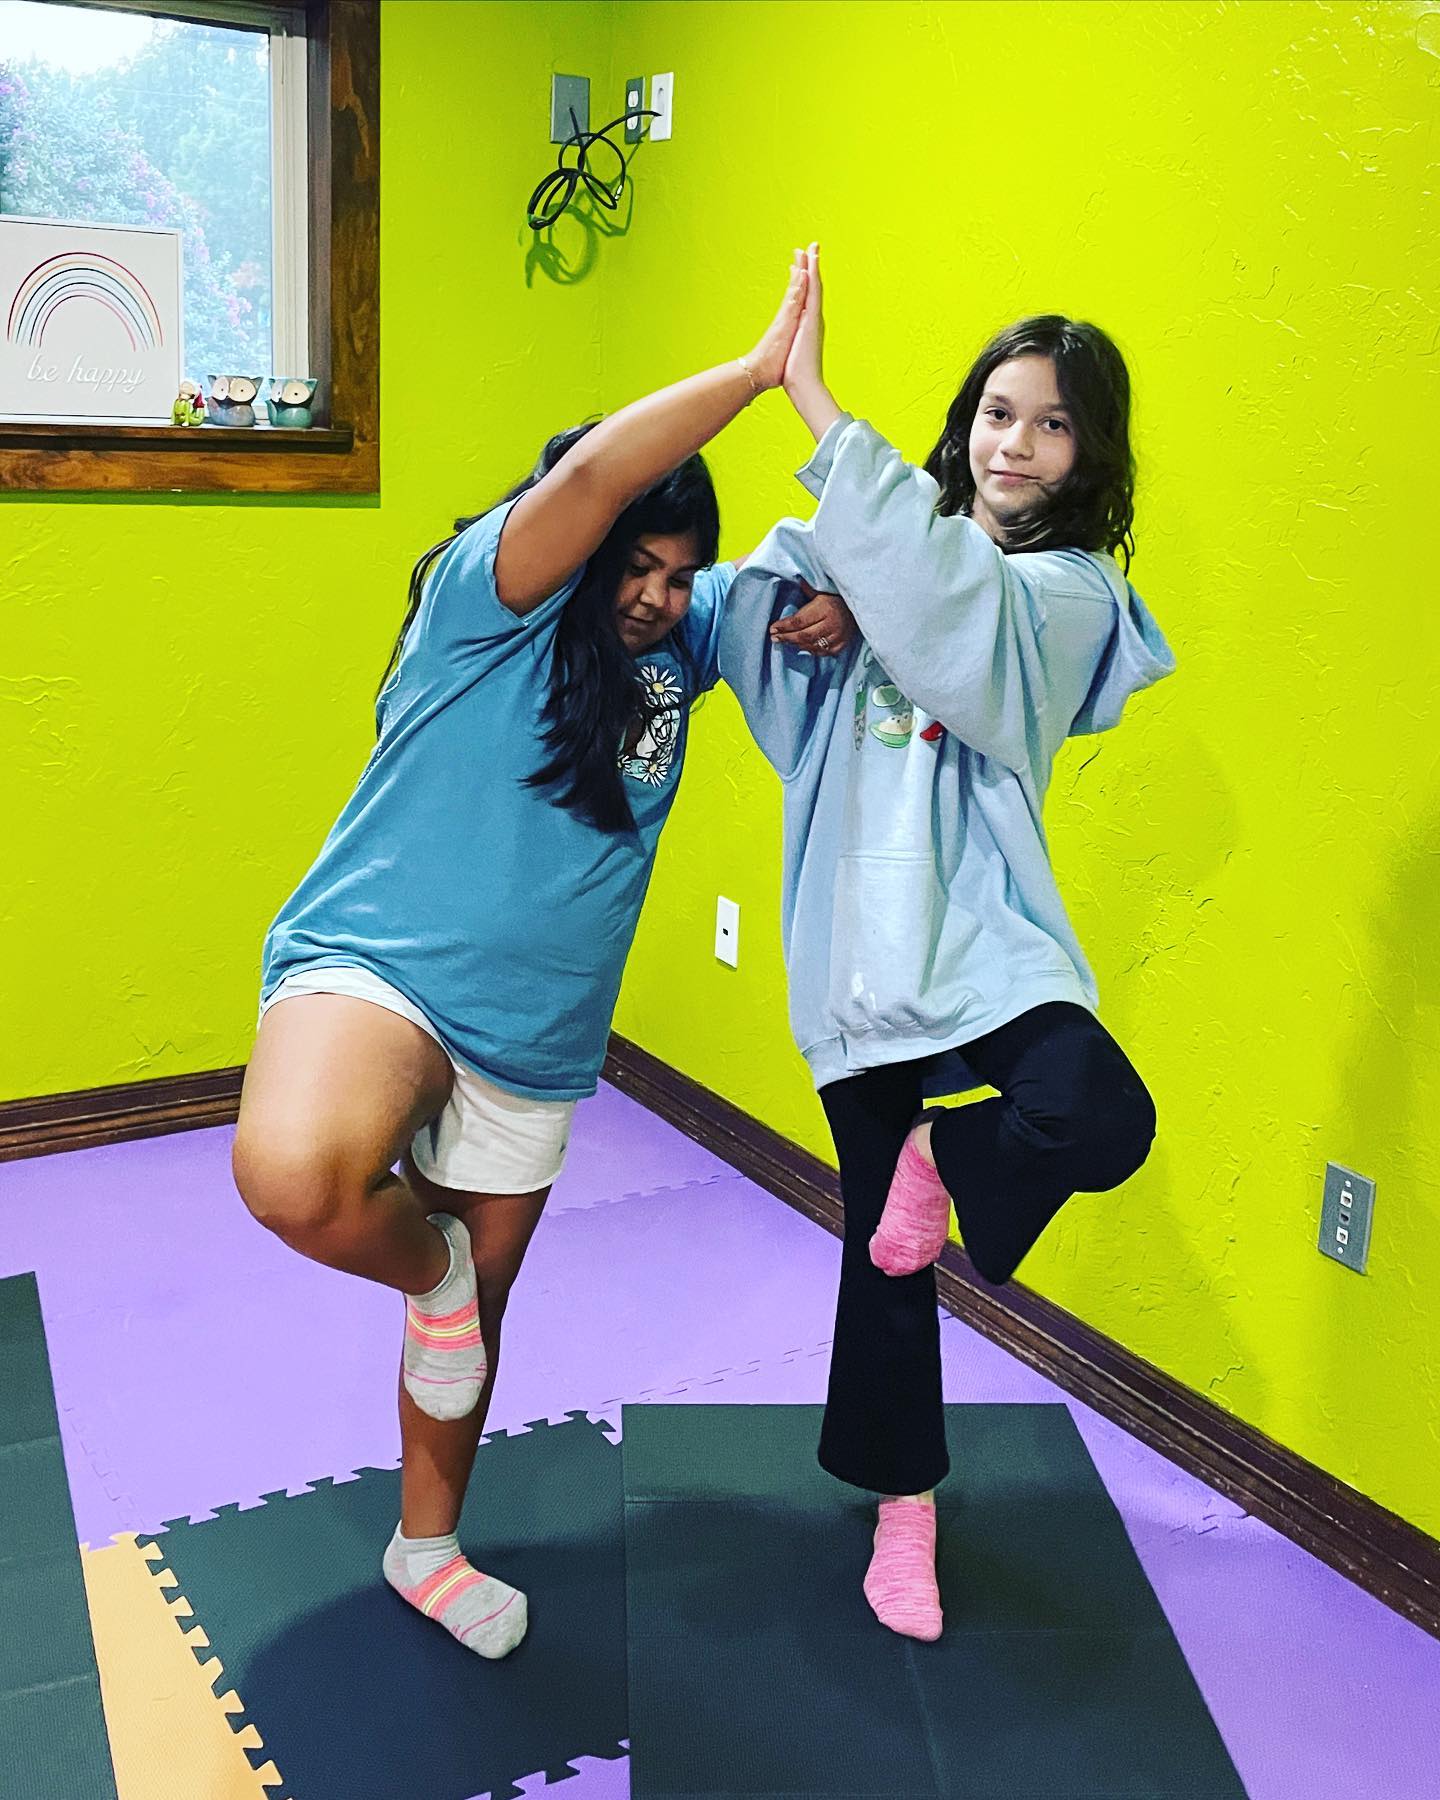 We’re working together this month as we talk friendship and friendship challenges! Of course this means lots of partner poses and mindfulness games!

#treepose #partnerpose #yogaforkids #balance #friendship #yogicubs #workingtogether #mansfieldtx #arlingtontx #gptx